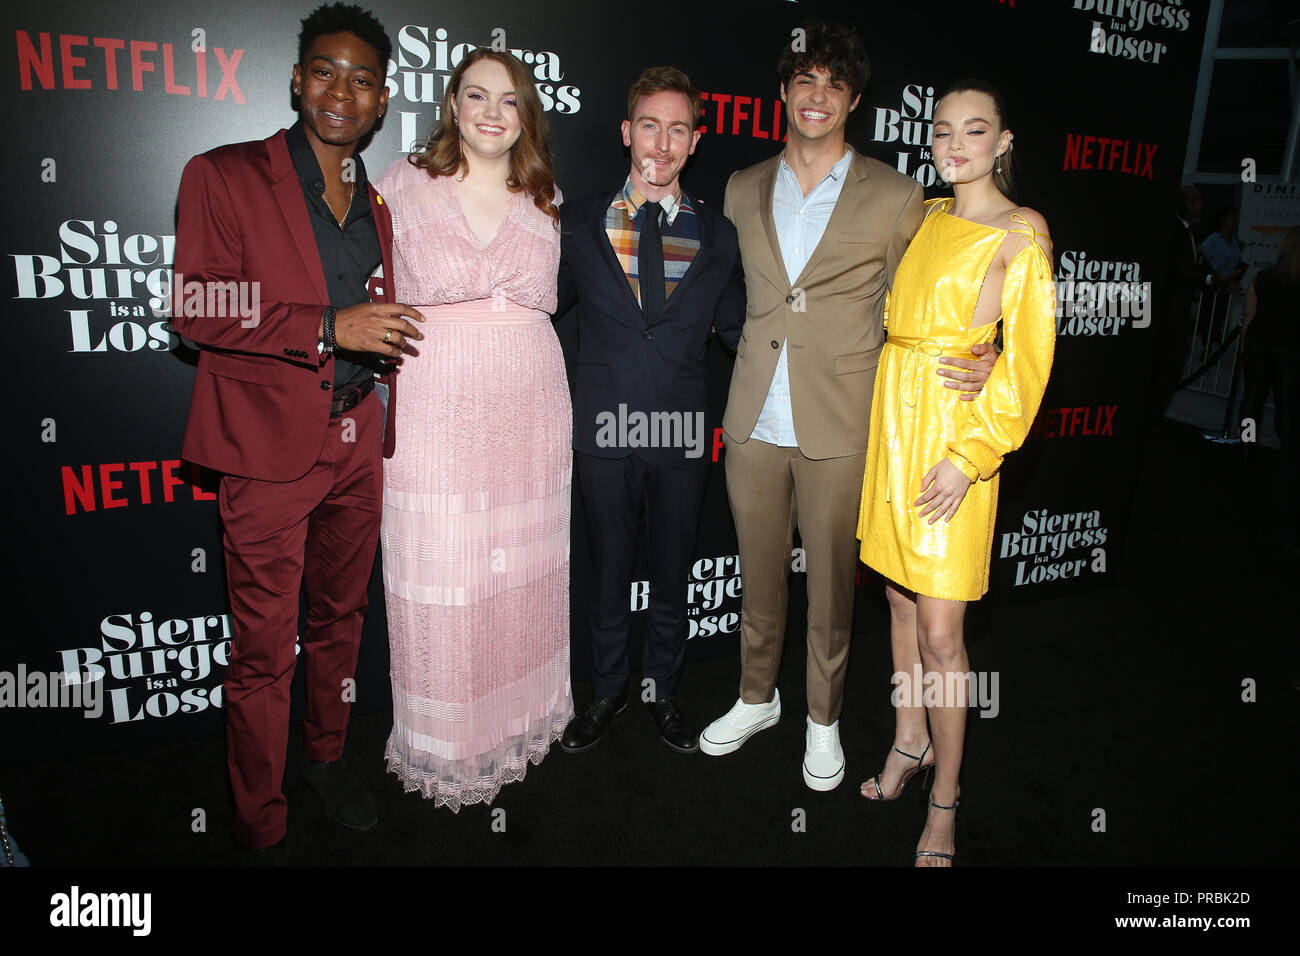 Premiere Of Netflix's "Sierra Burgess Is A Loser" Featuring: Kristine  Froseth, Shannon Purser, Noah Centineo, Ian Samuels Where: Hollywood,  California, United States When: 31 Aug 2018 Credit: FayesVision/WENN.com  Stock Photo - Alamy